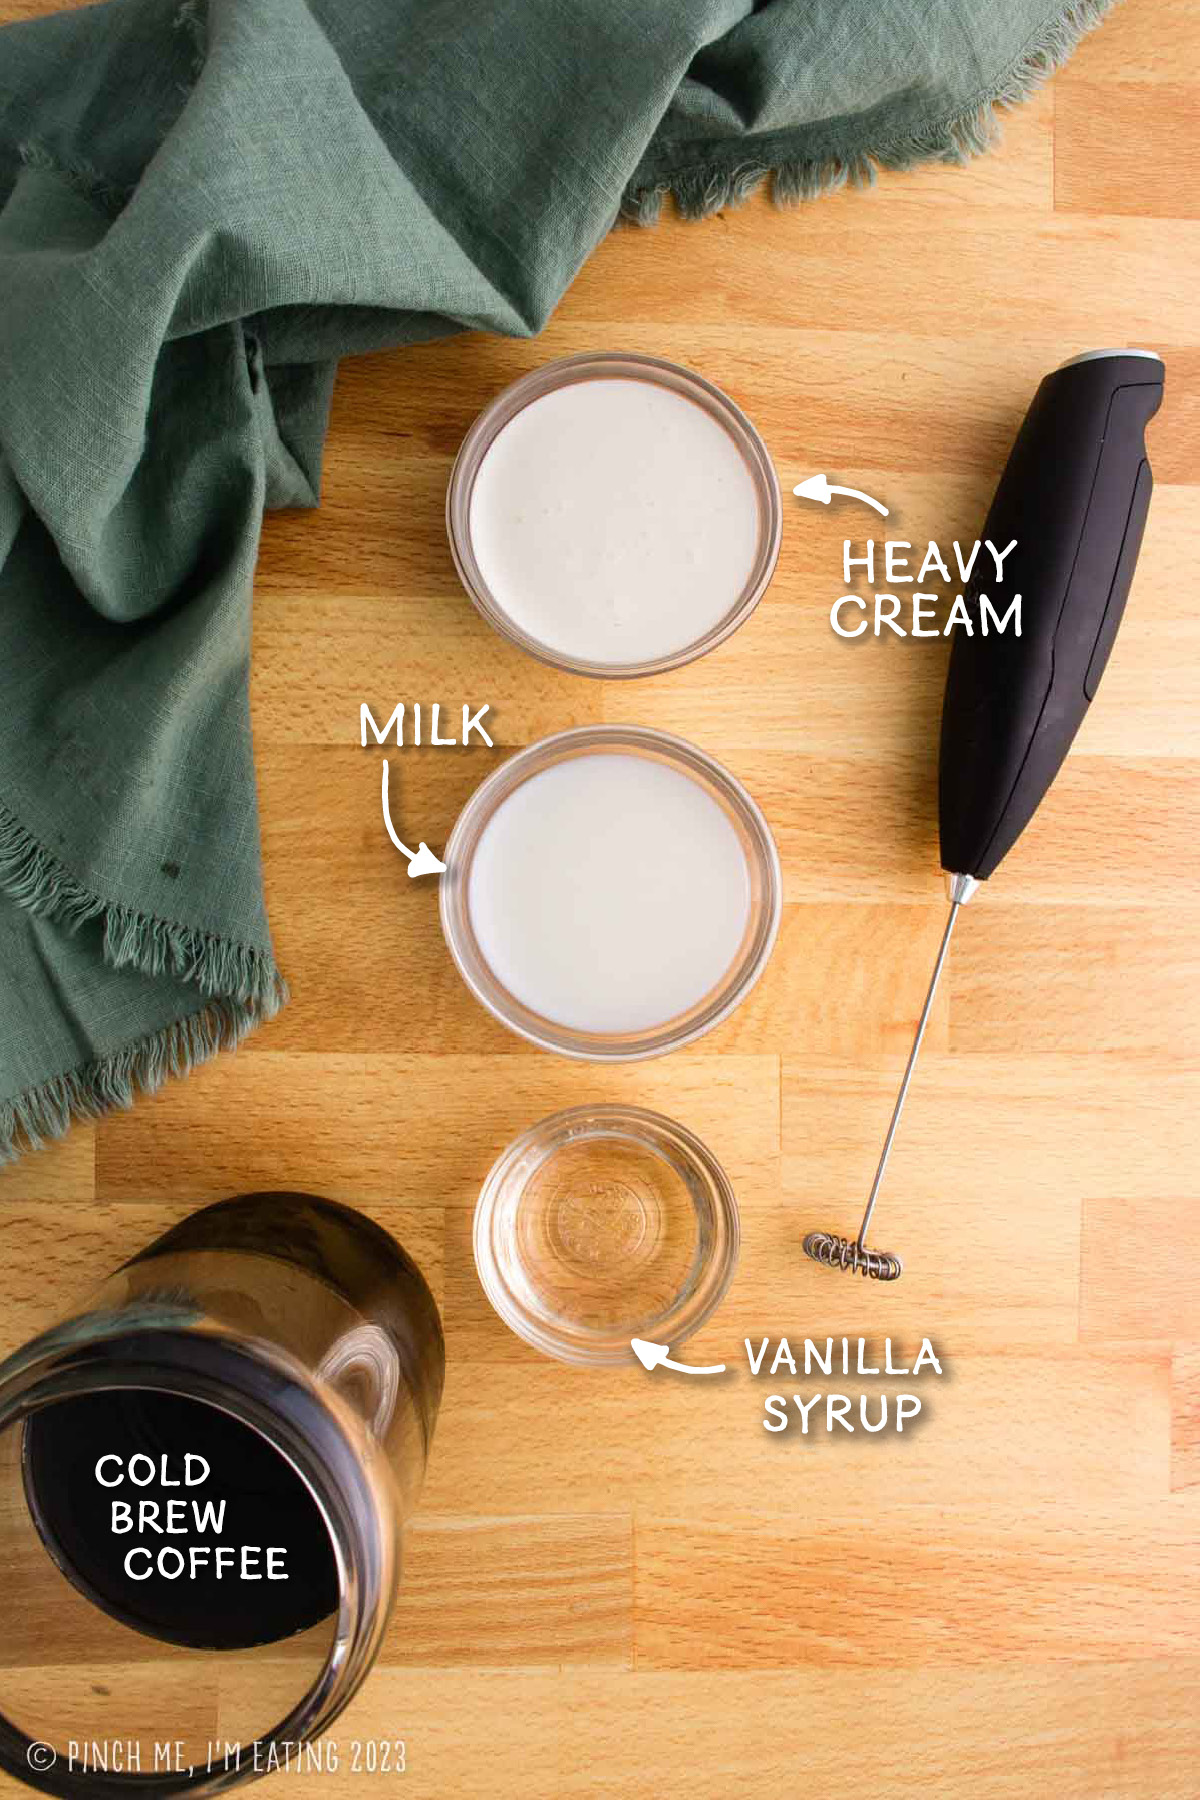 Ingredients for making sweet cream cold foam coffee, including an electric handheld milk frother and glass of cold brew coffee.